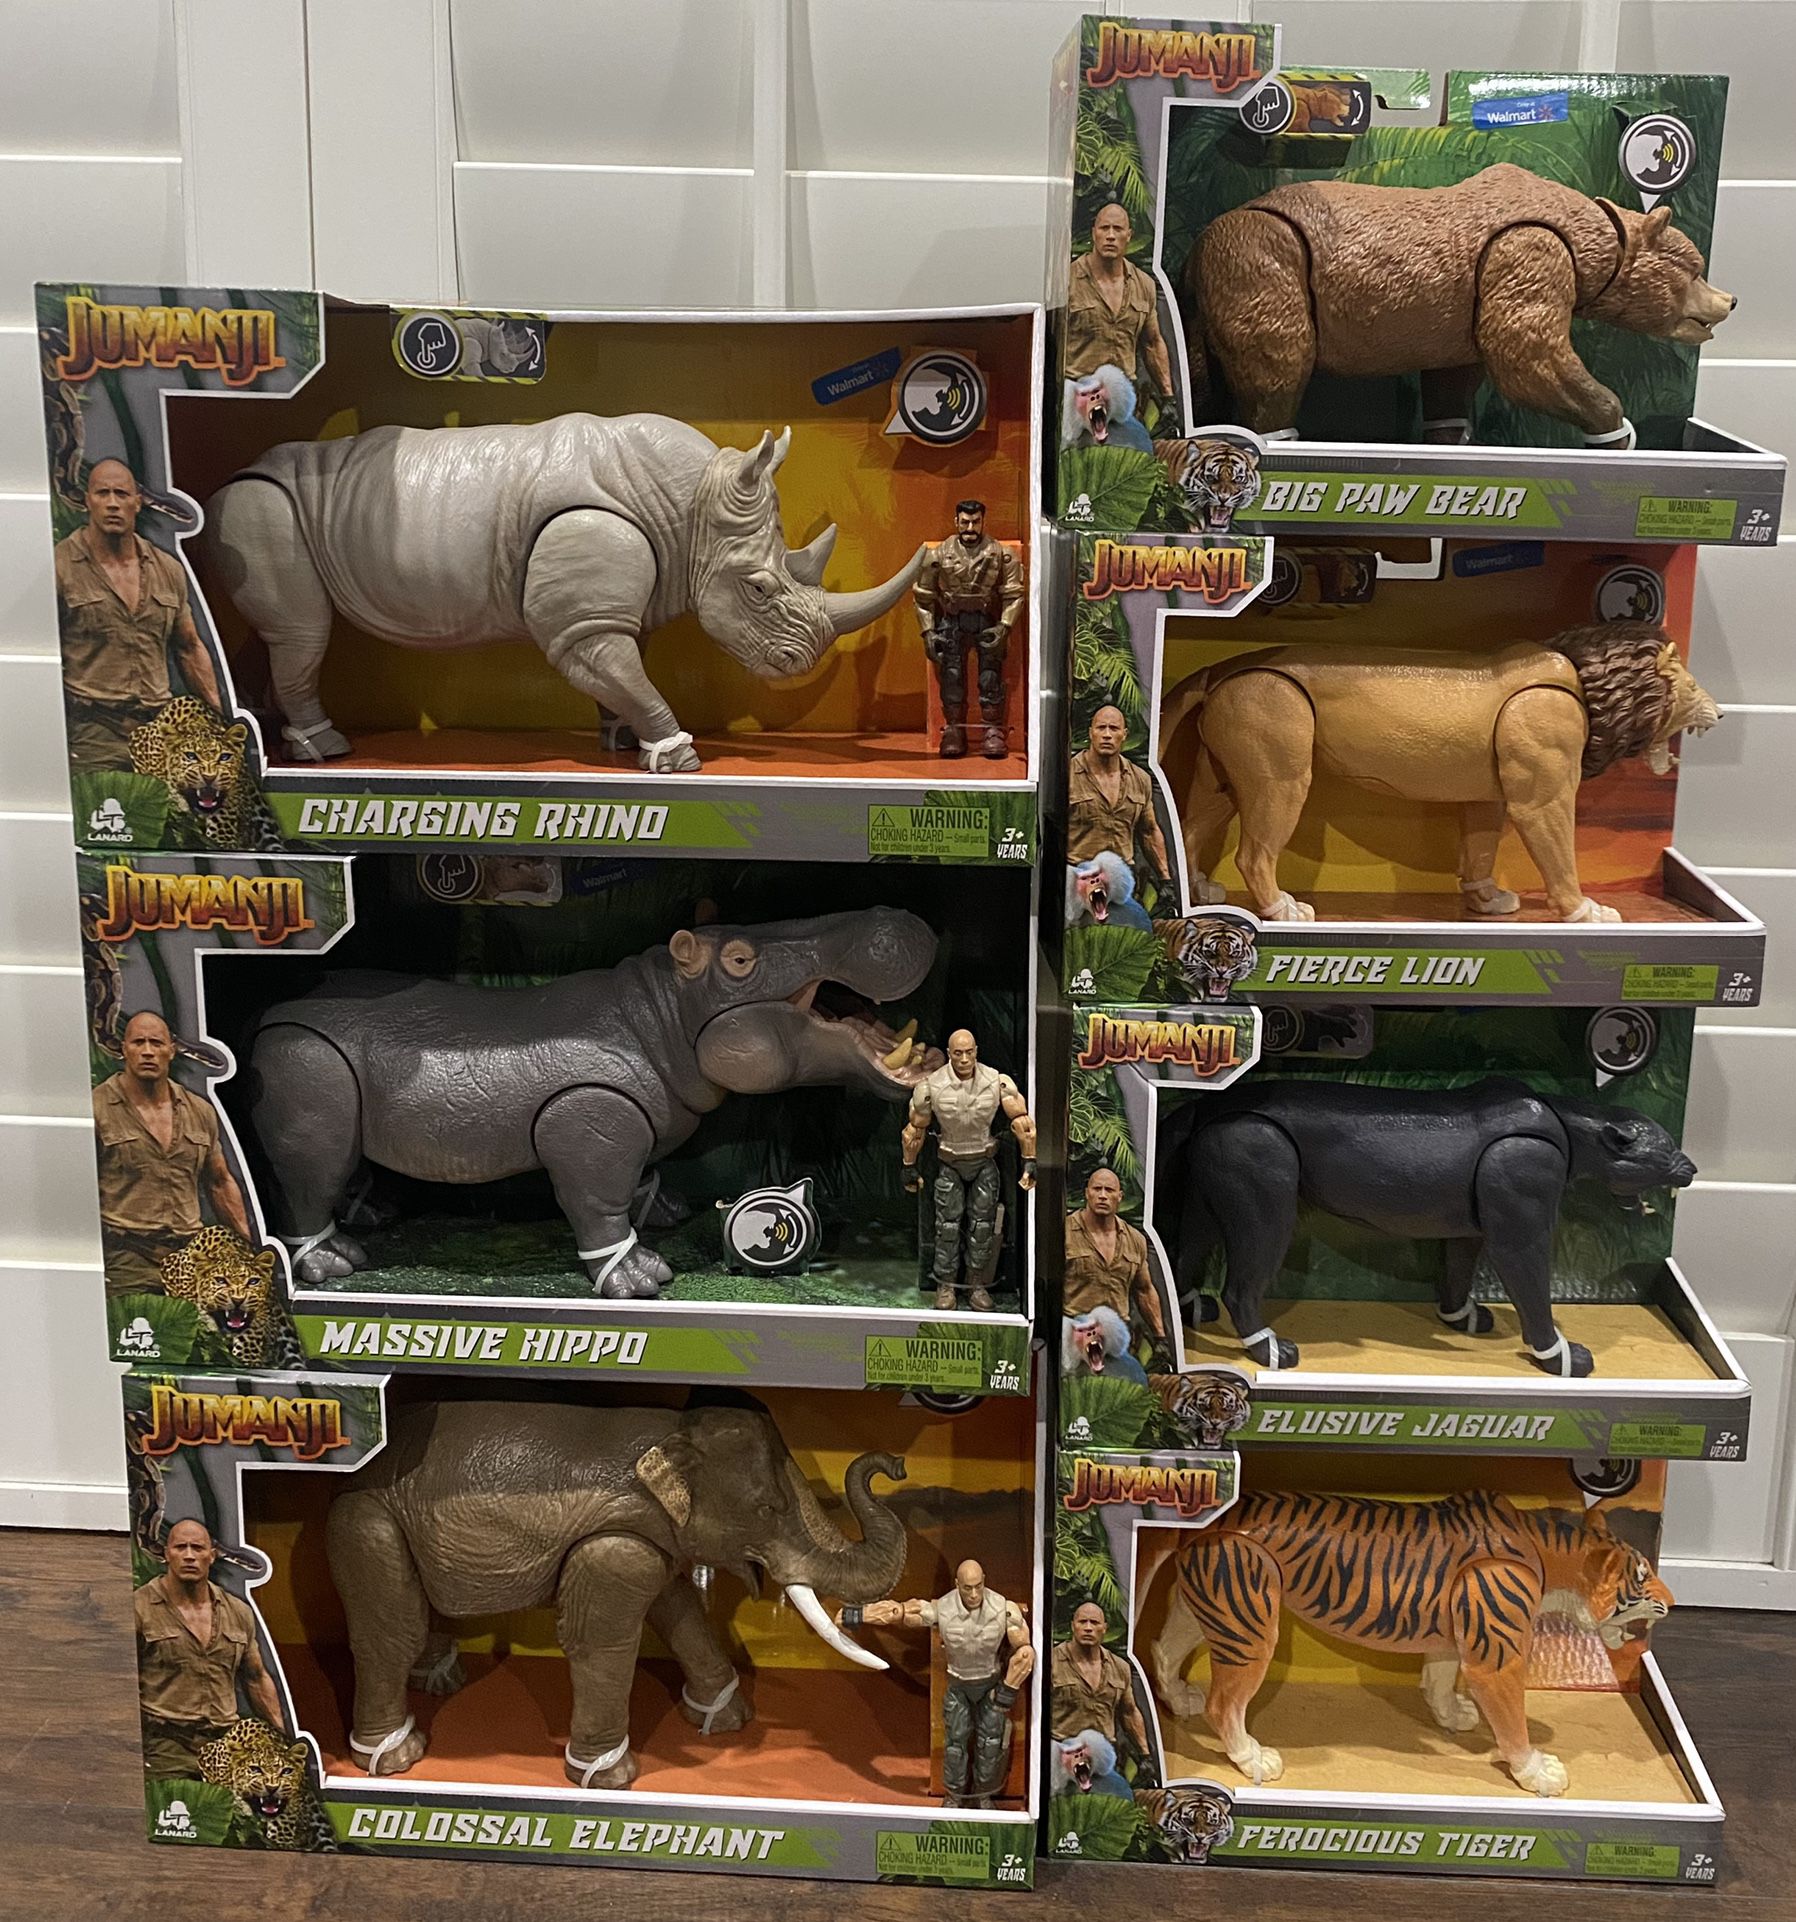 NEW Jumanji Movie Set of 7 Creature/Animal Figures w/ Sounds - Set for $70  for Sale in Montclair, CA - OfferUp